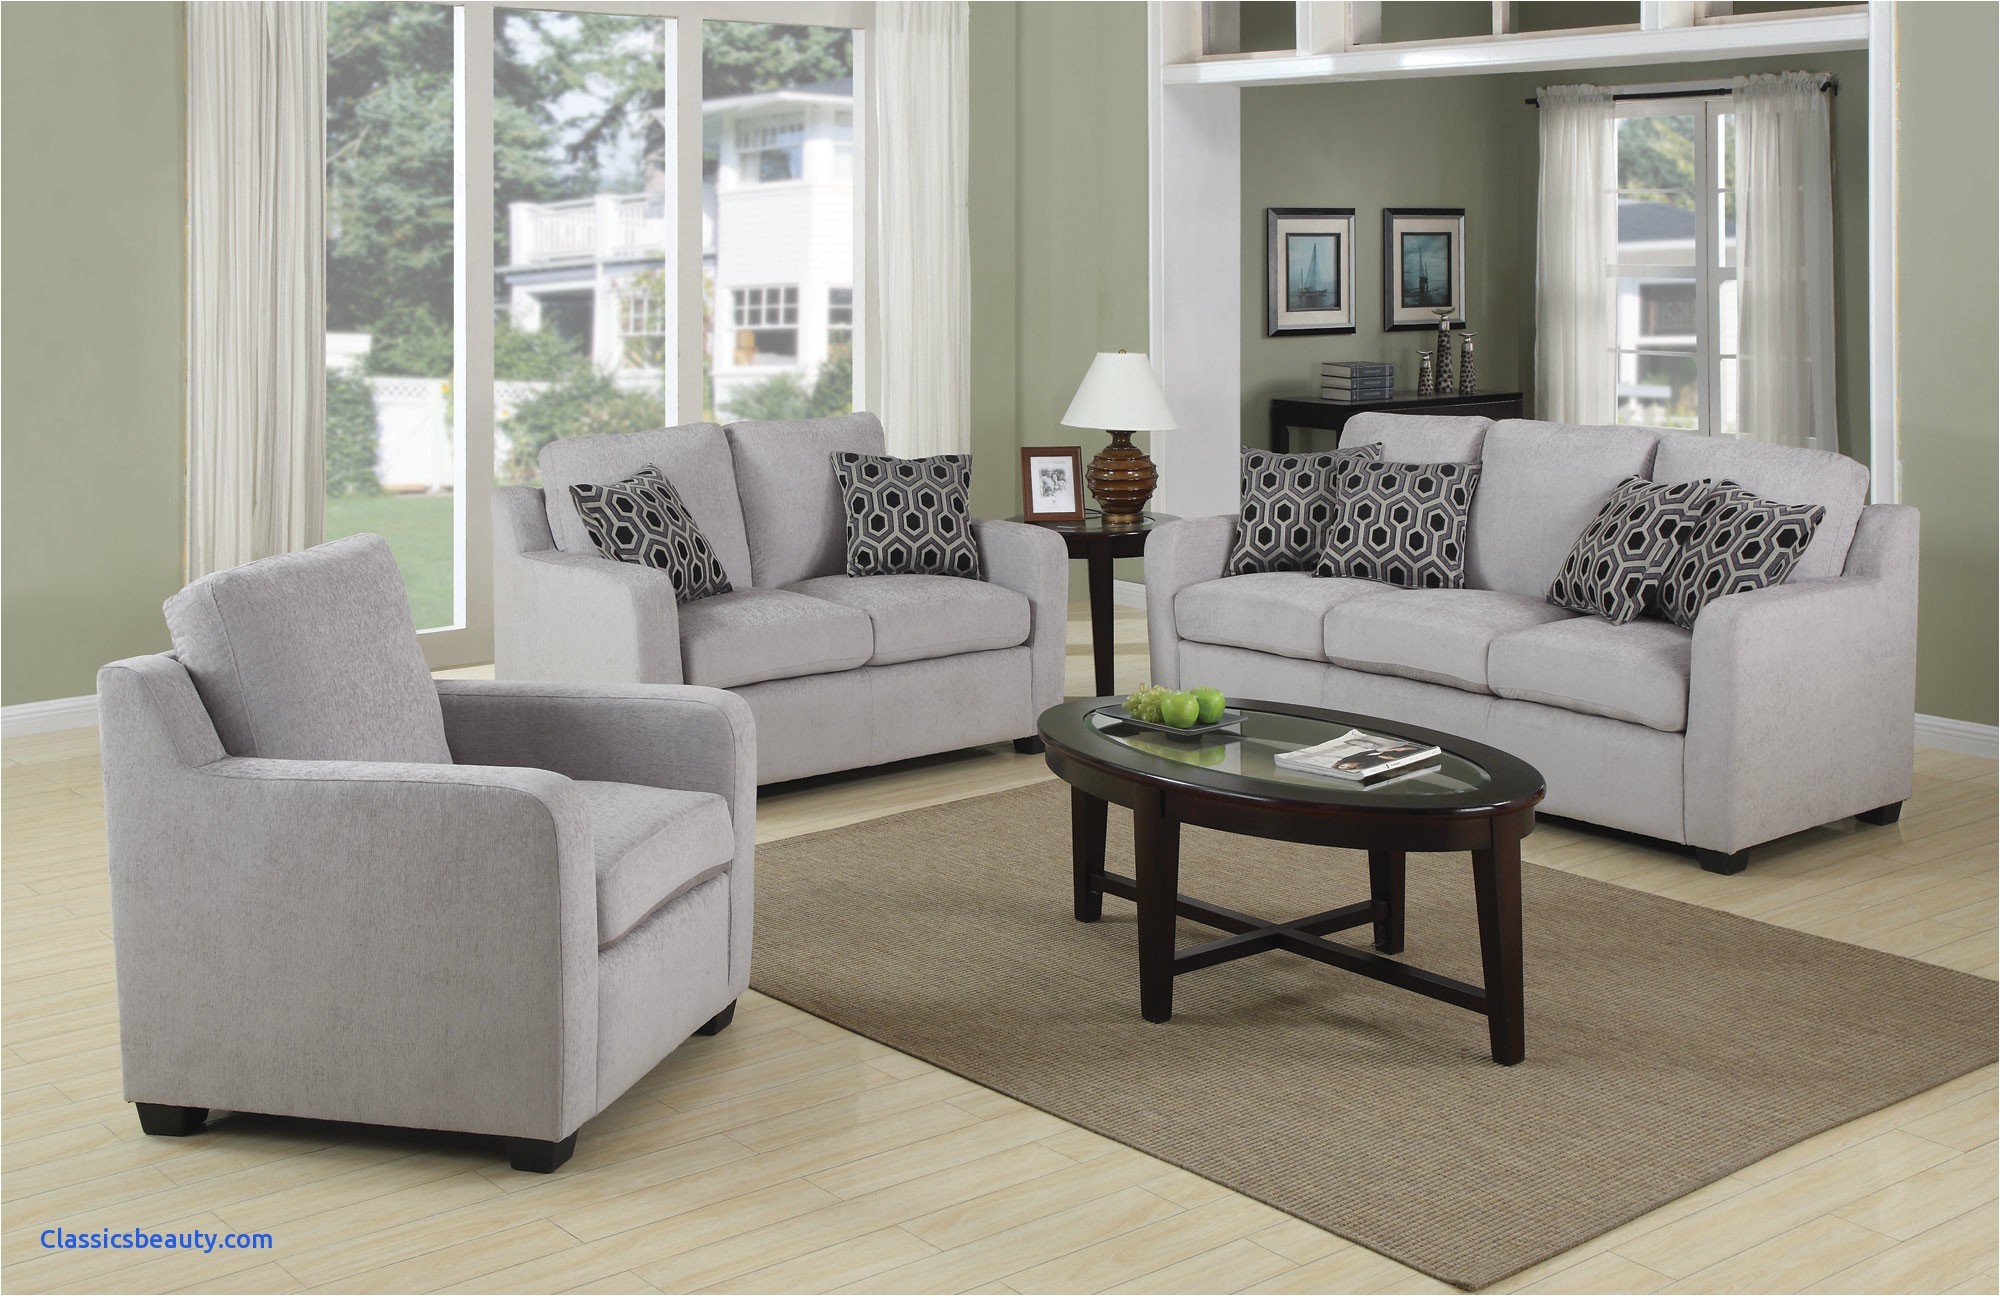 mesmerizing best sofas for small living rooms 24 sectional sofa armless new room chairs simmons madelyn raf bump of